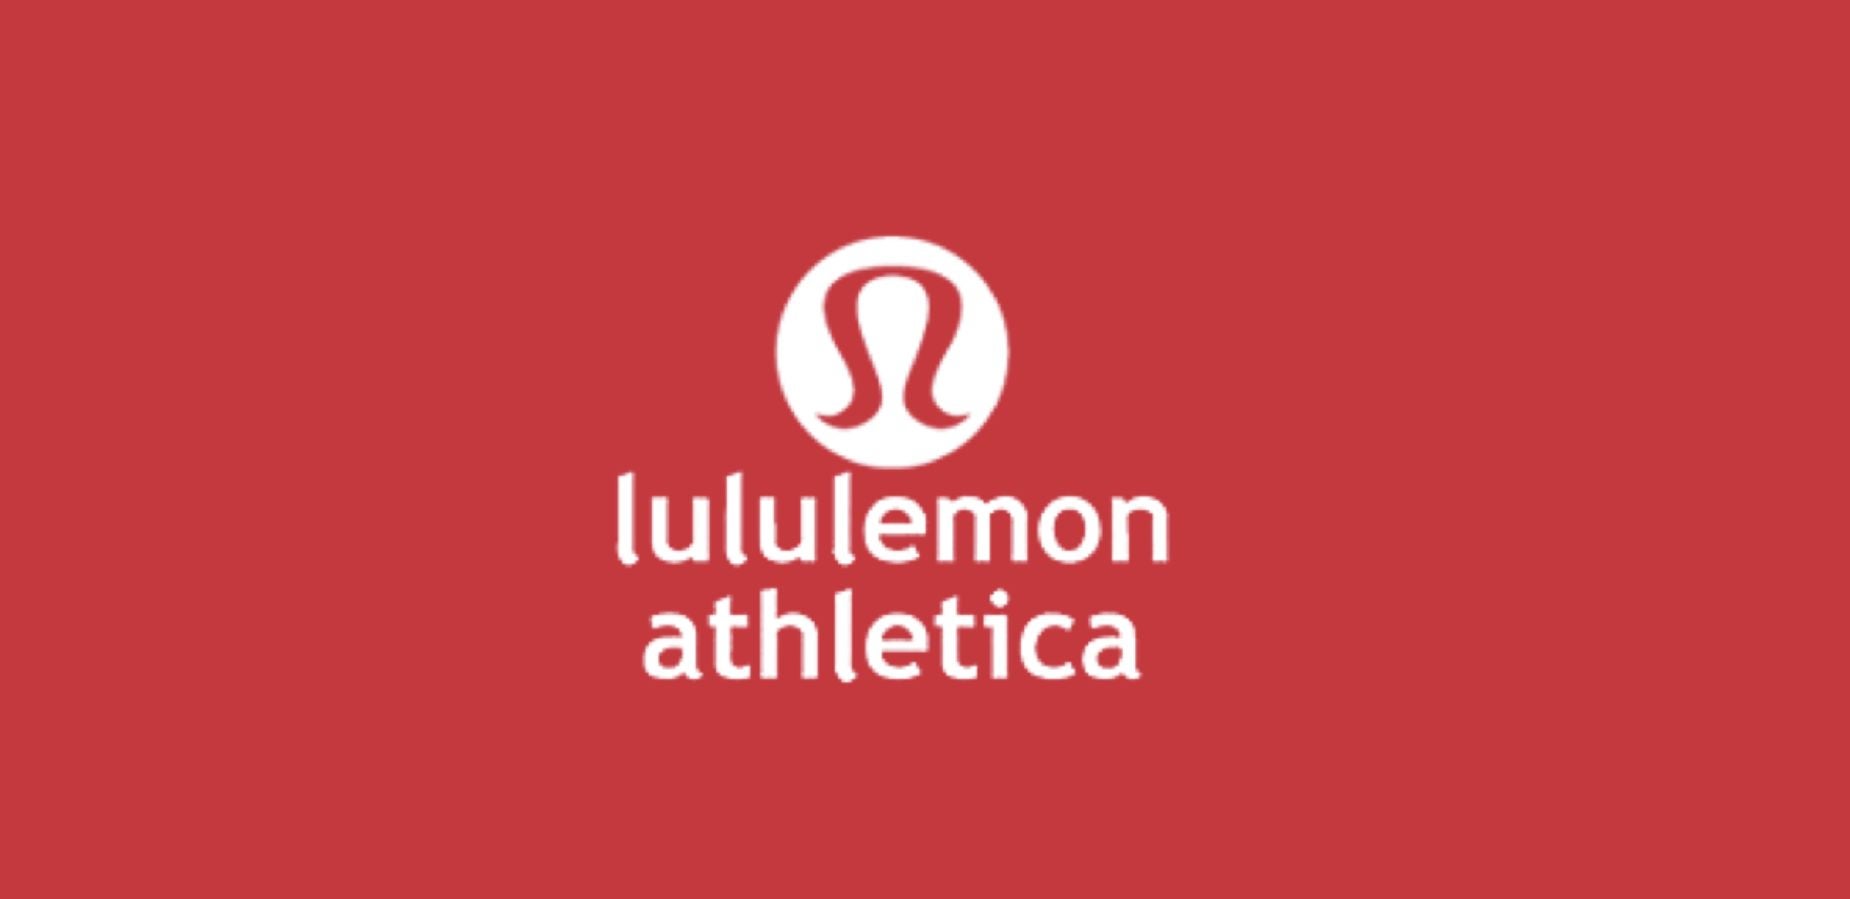 These Analysts Slash Their Forecasts On Lululemon After Q4 Results